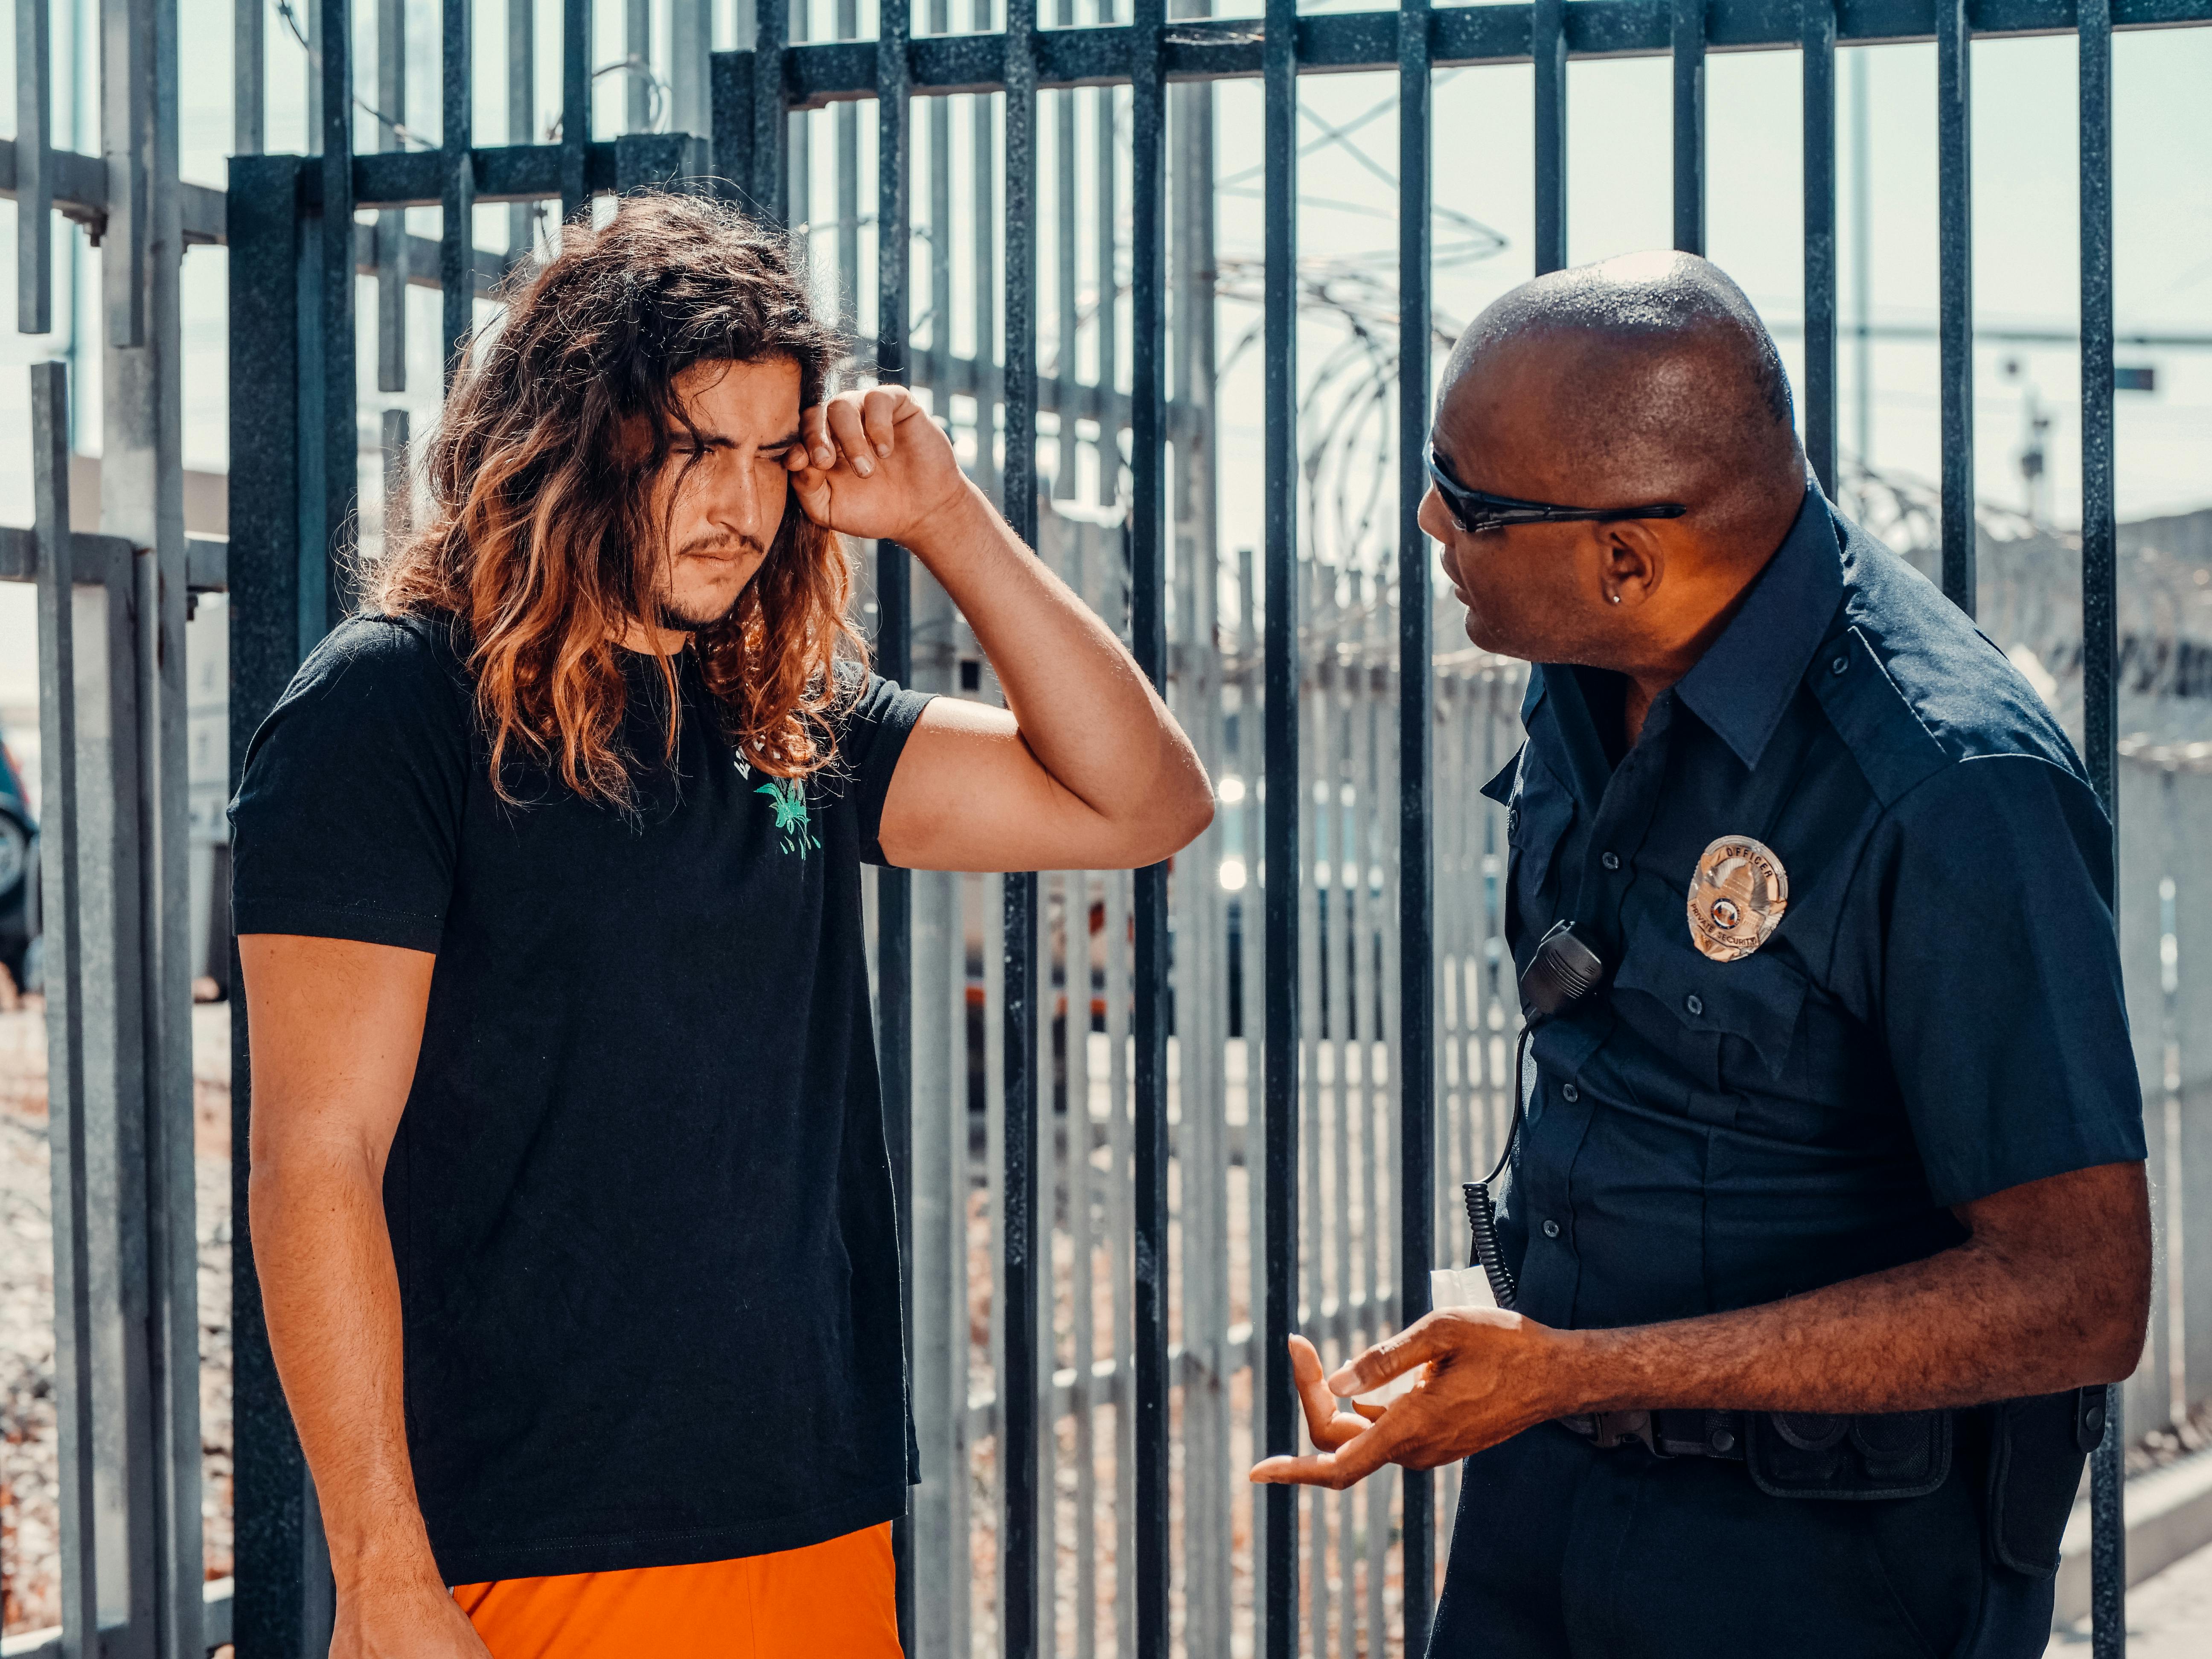 A man talking to a police officer | Source: Pexels